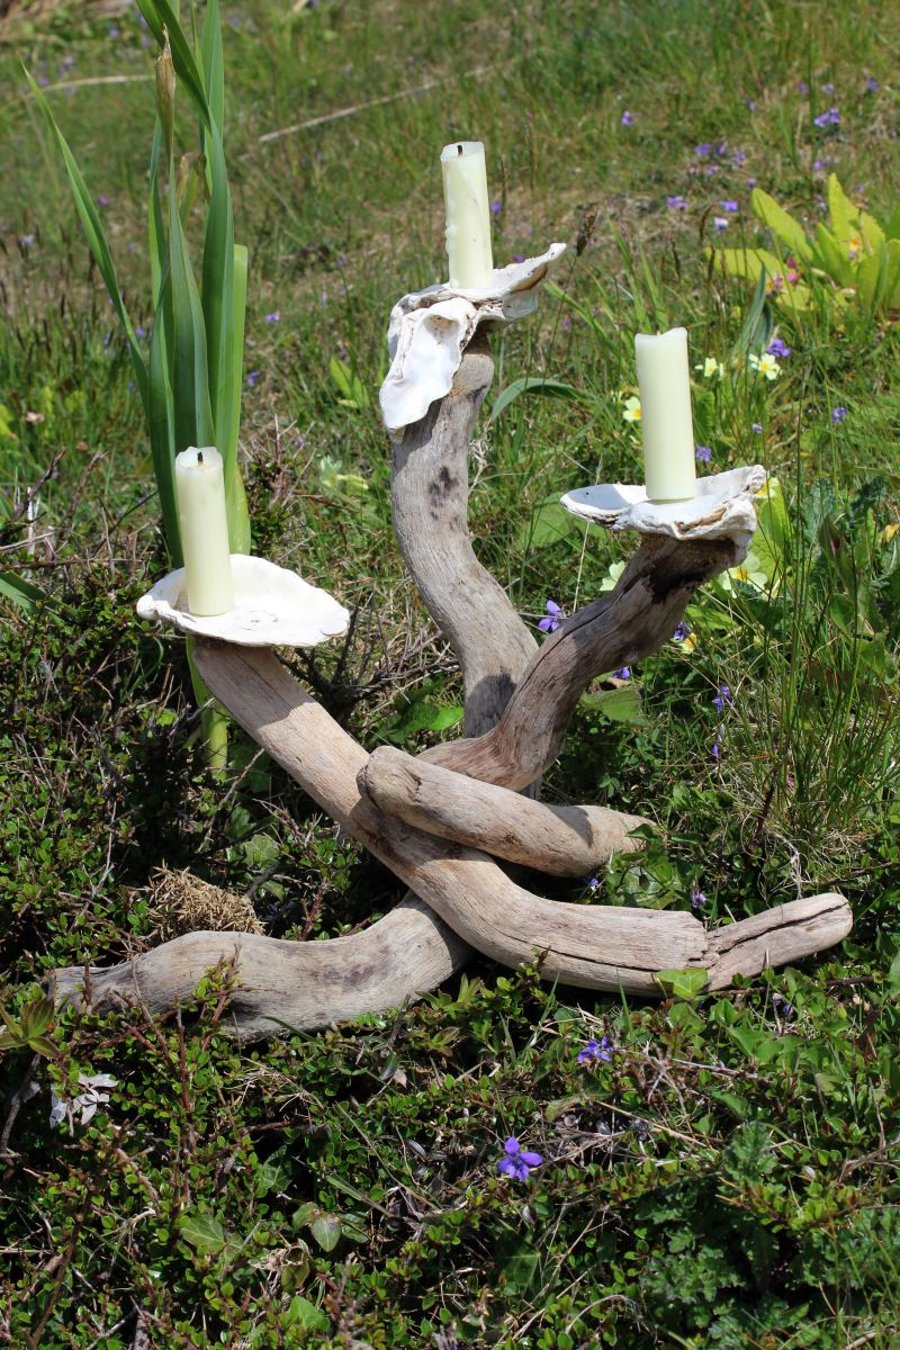 Driftwood Candle holder,Driftwood Candelabra,Driftwood candle stand,Table centre